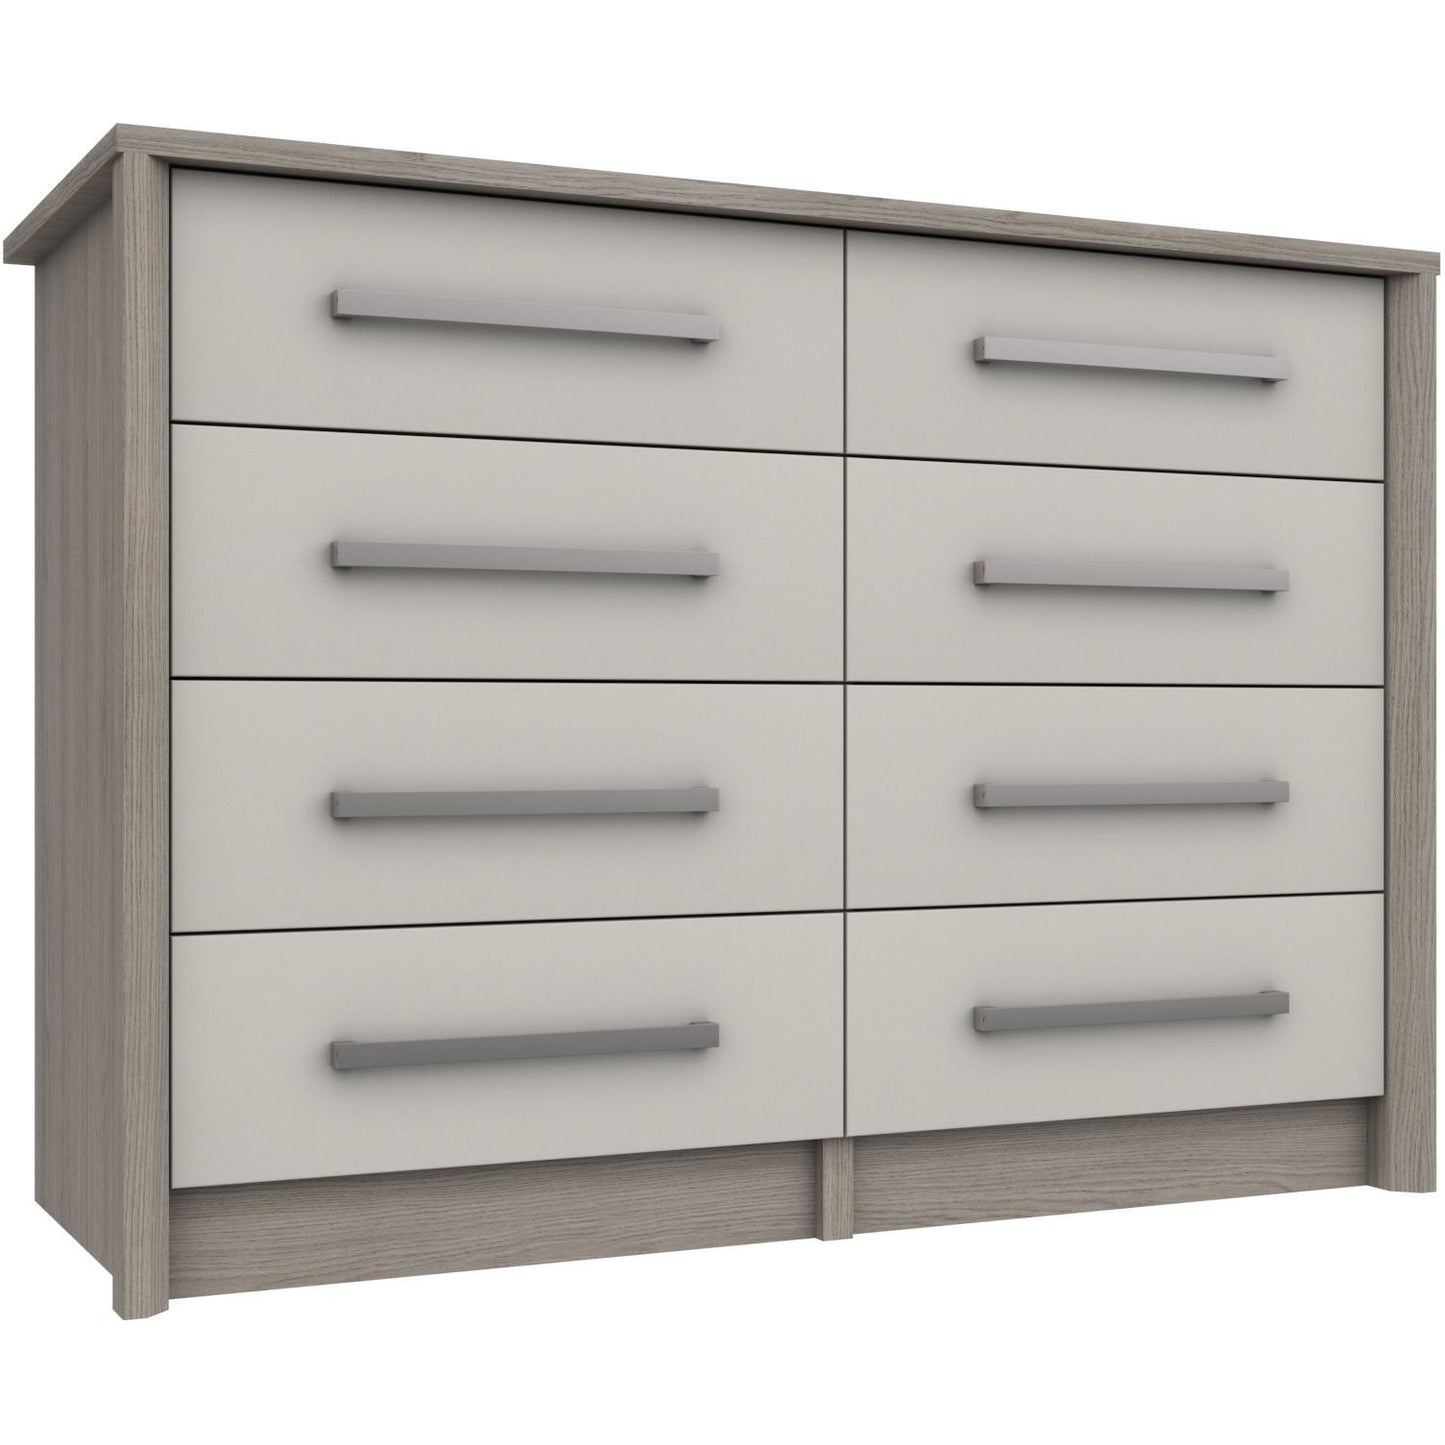 Arundel 4 Drawer Double Chest